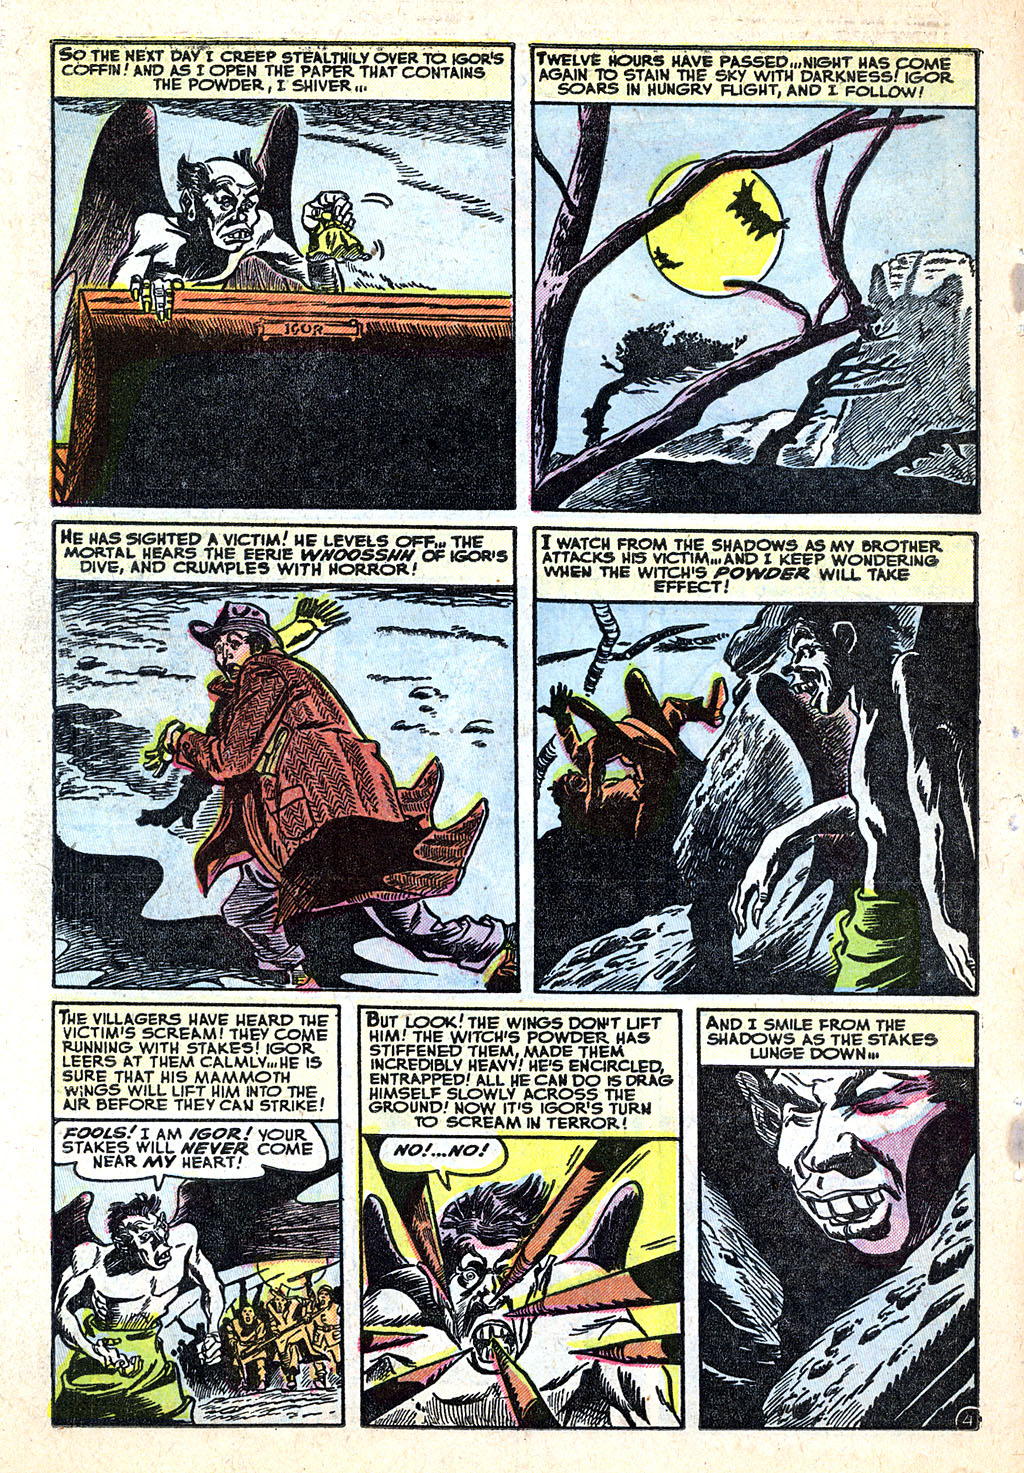 Marvel Tales (1949) 127 Page 5